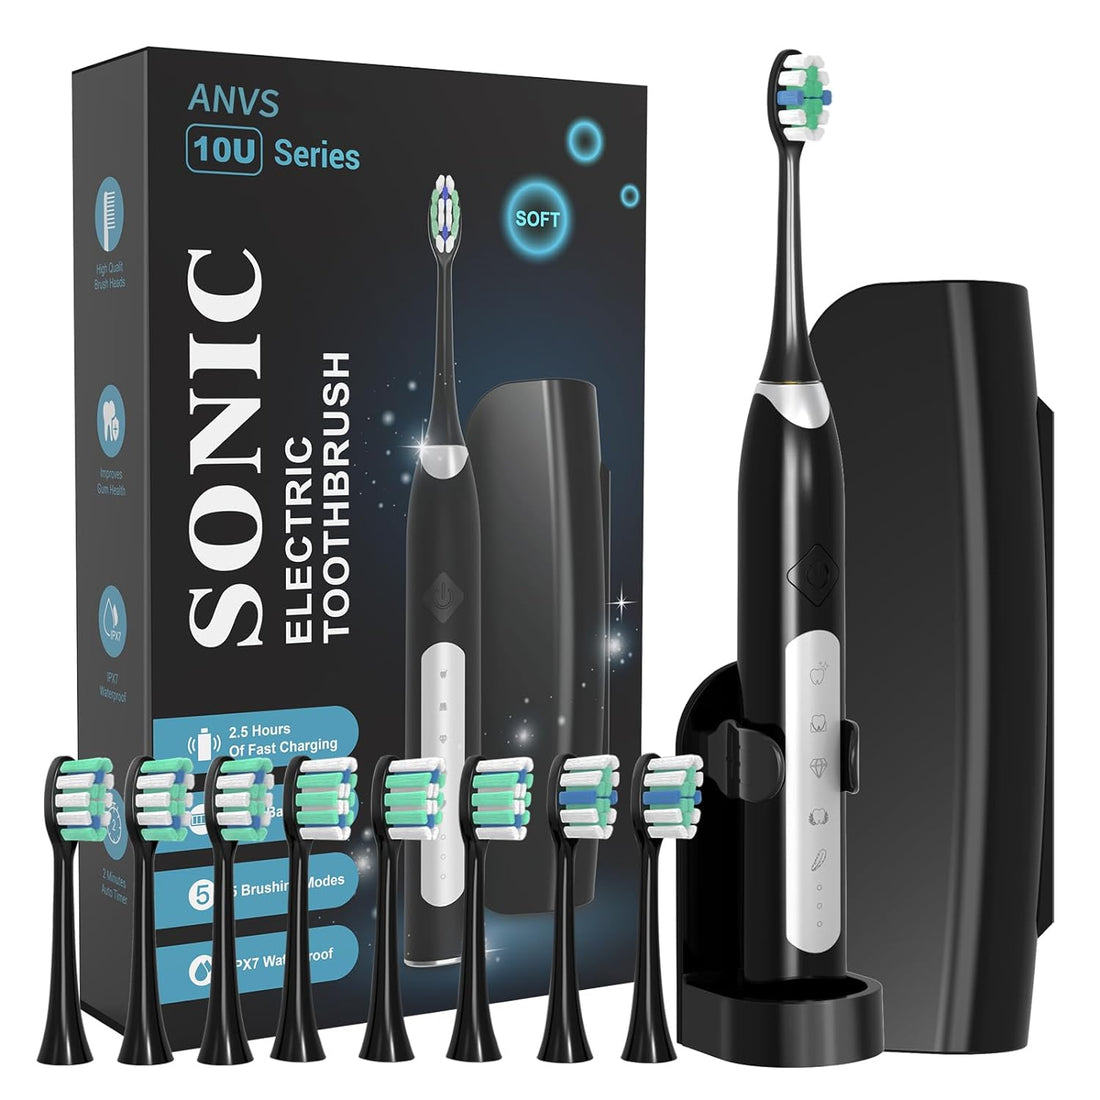 Sonic Electric Toothbrushes for Adults, 8 Brush Heads Electric Toothbrush Deep Clean 5 Modes, Rechargeable Travel Toothbrushes Fast Charge with 2 Minutes Smart Timer